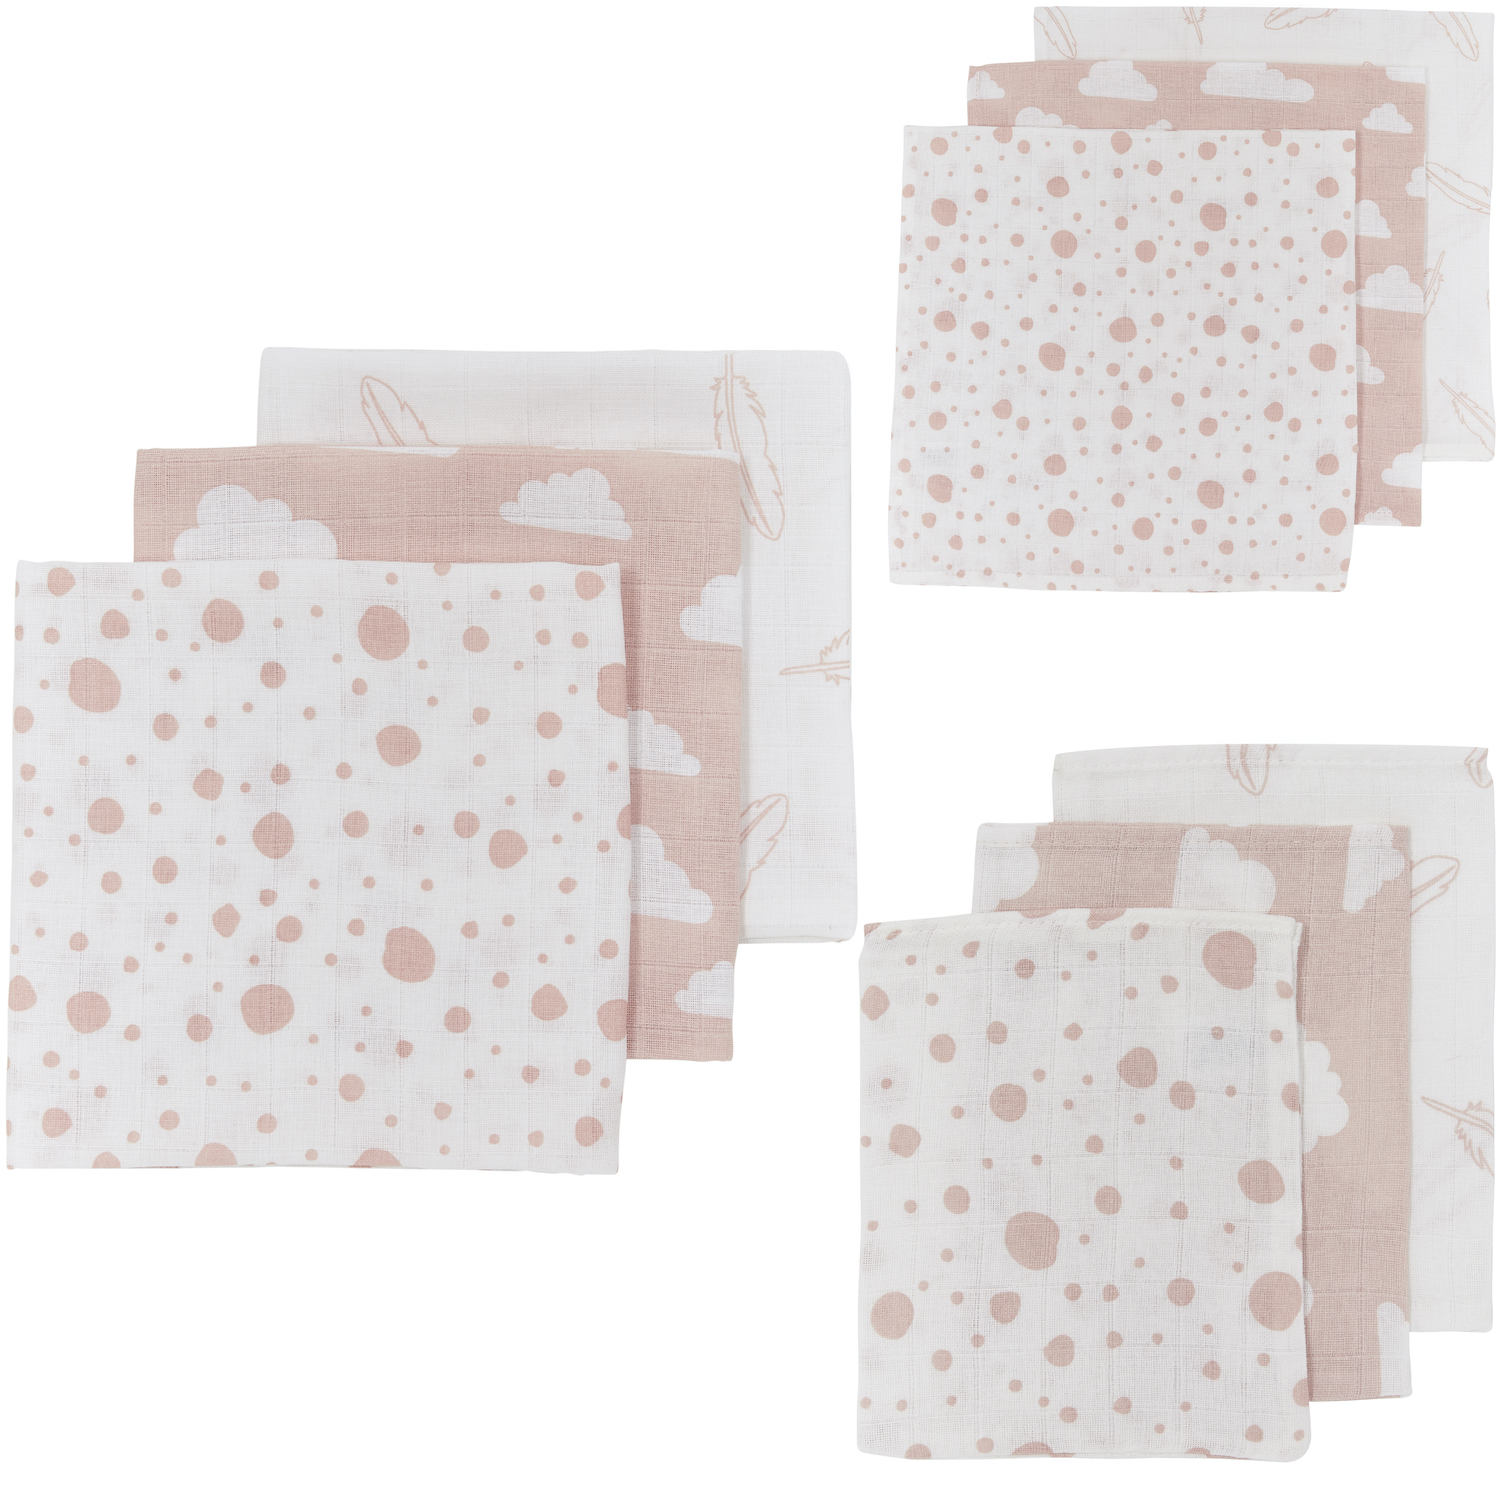 Starterset 9-pack hydrofiel Clouds/Dots/Feathers - pink